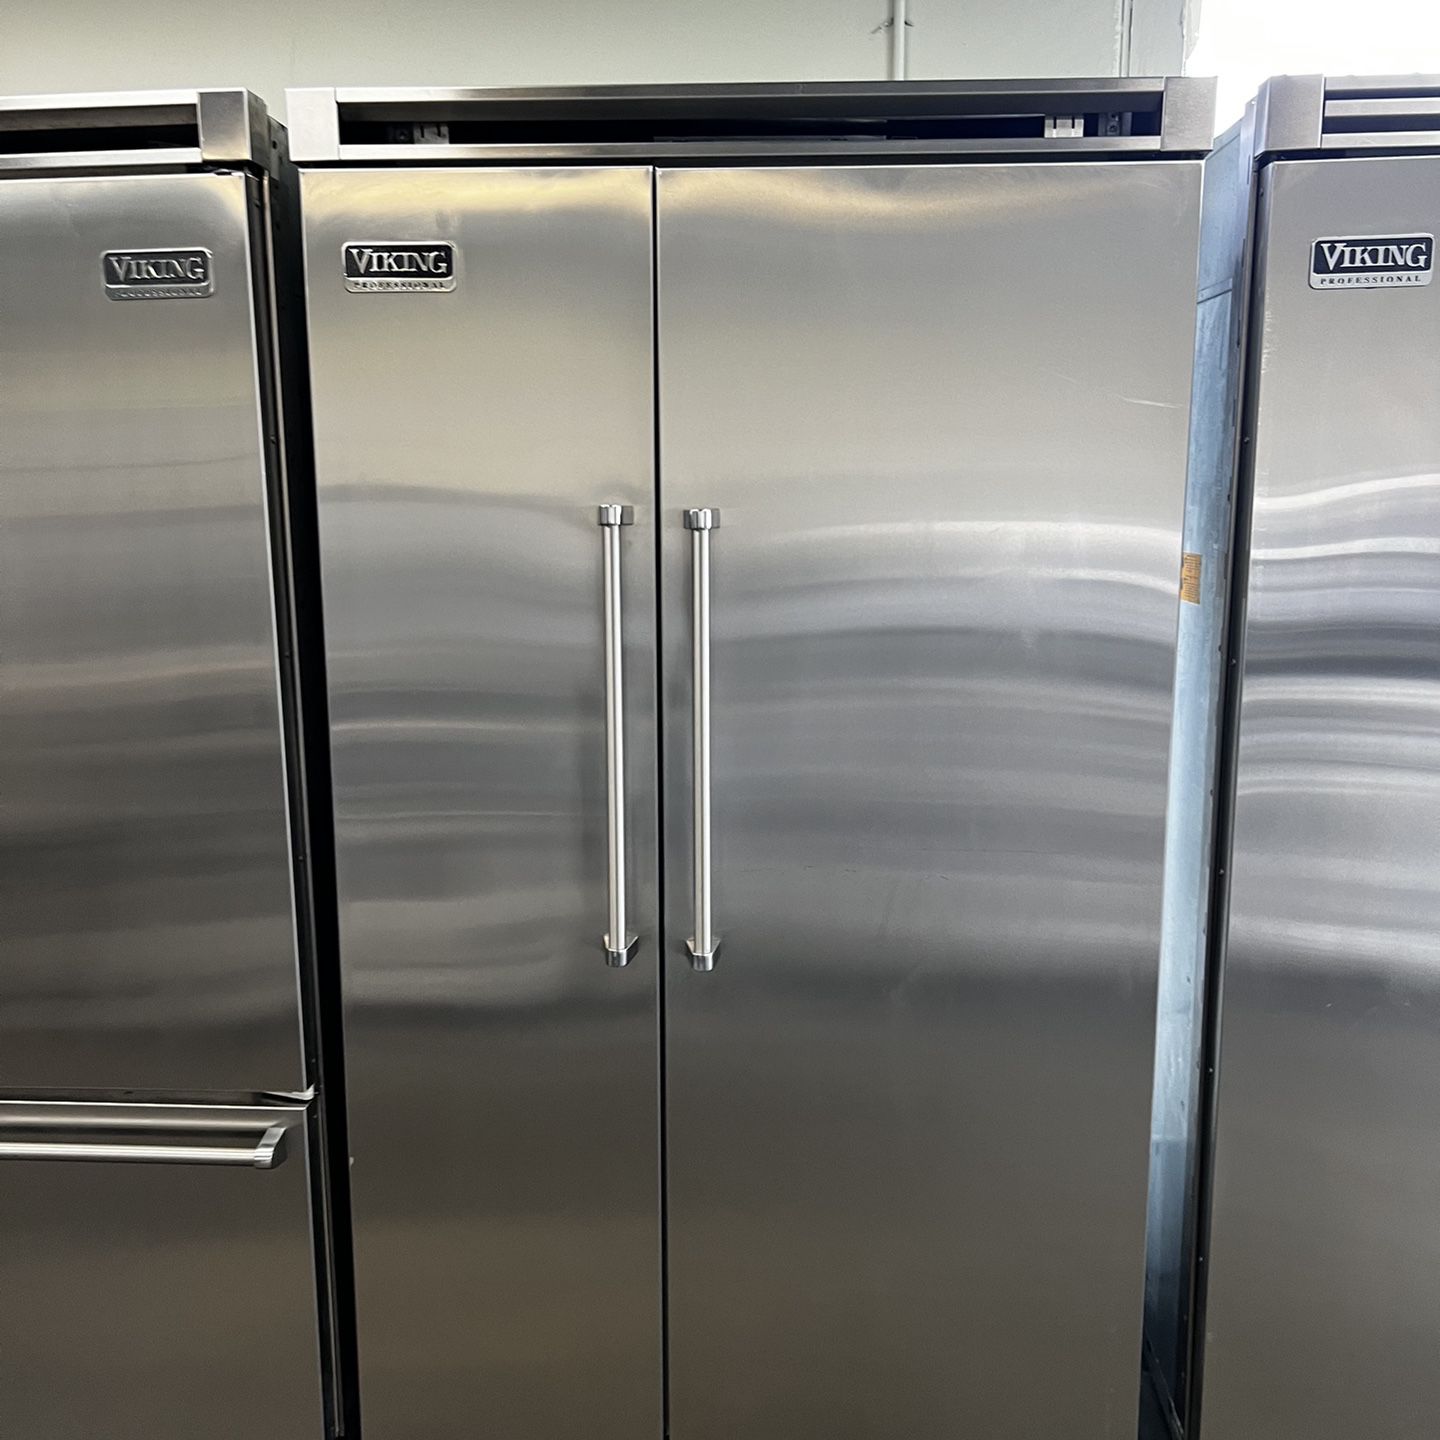 Viking 48”Wide Built In Stainless Steel Side By Side Refrigerator 